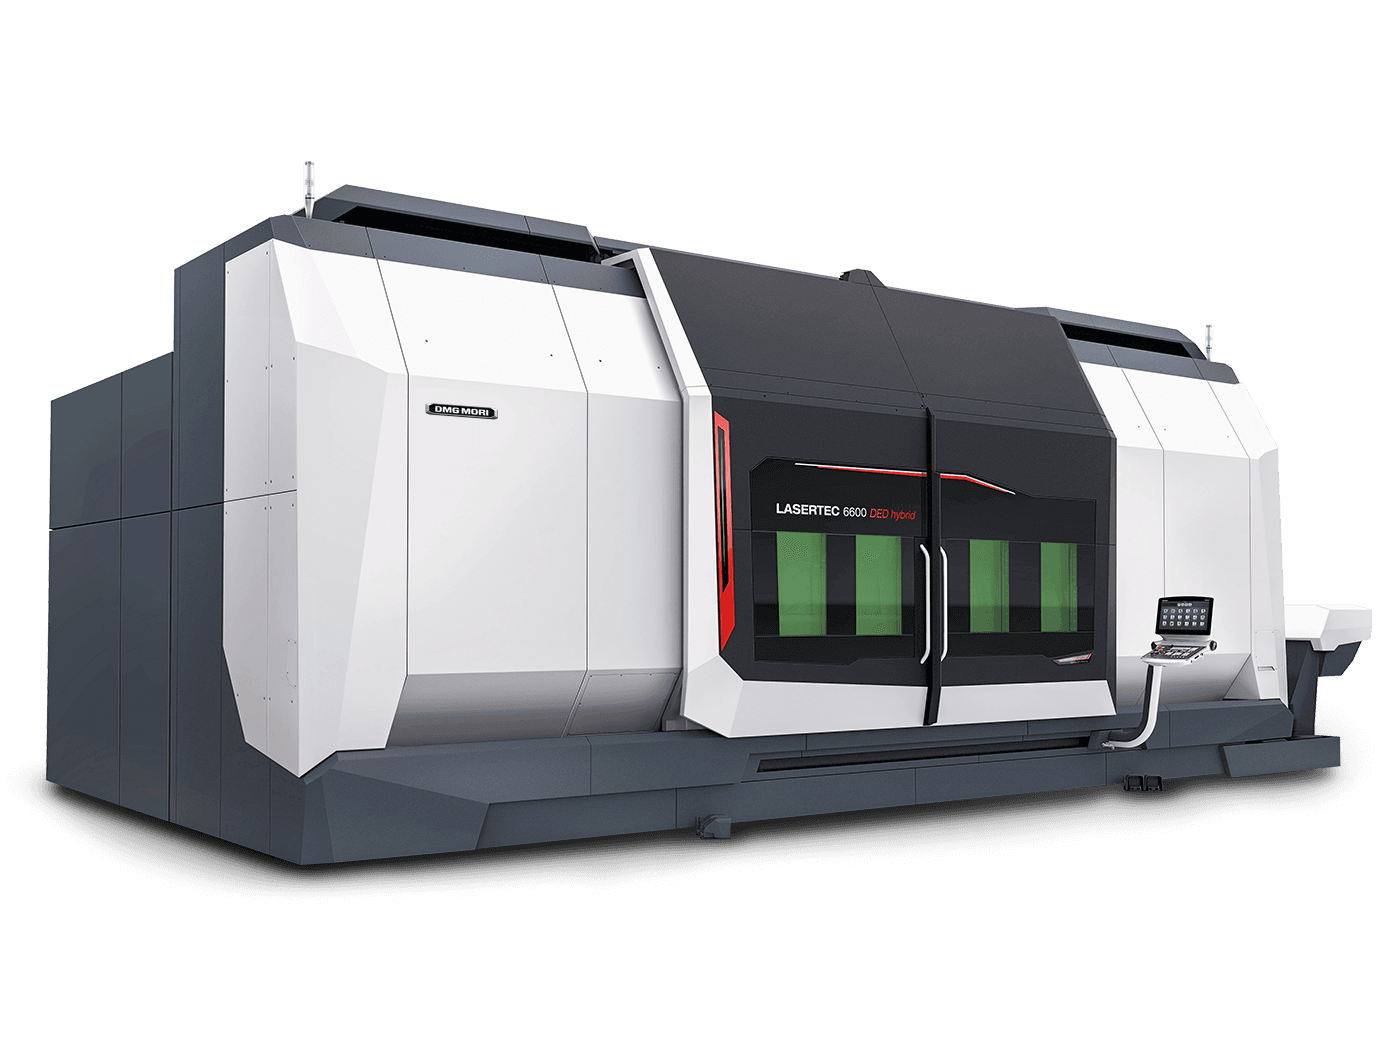 Image for LASERTEC 6600 DED hybrid - ADDITIVE MANUFACTURING Machines by DMG MORI